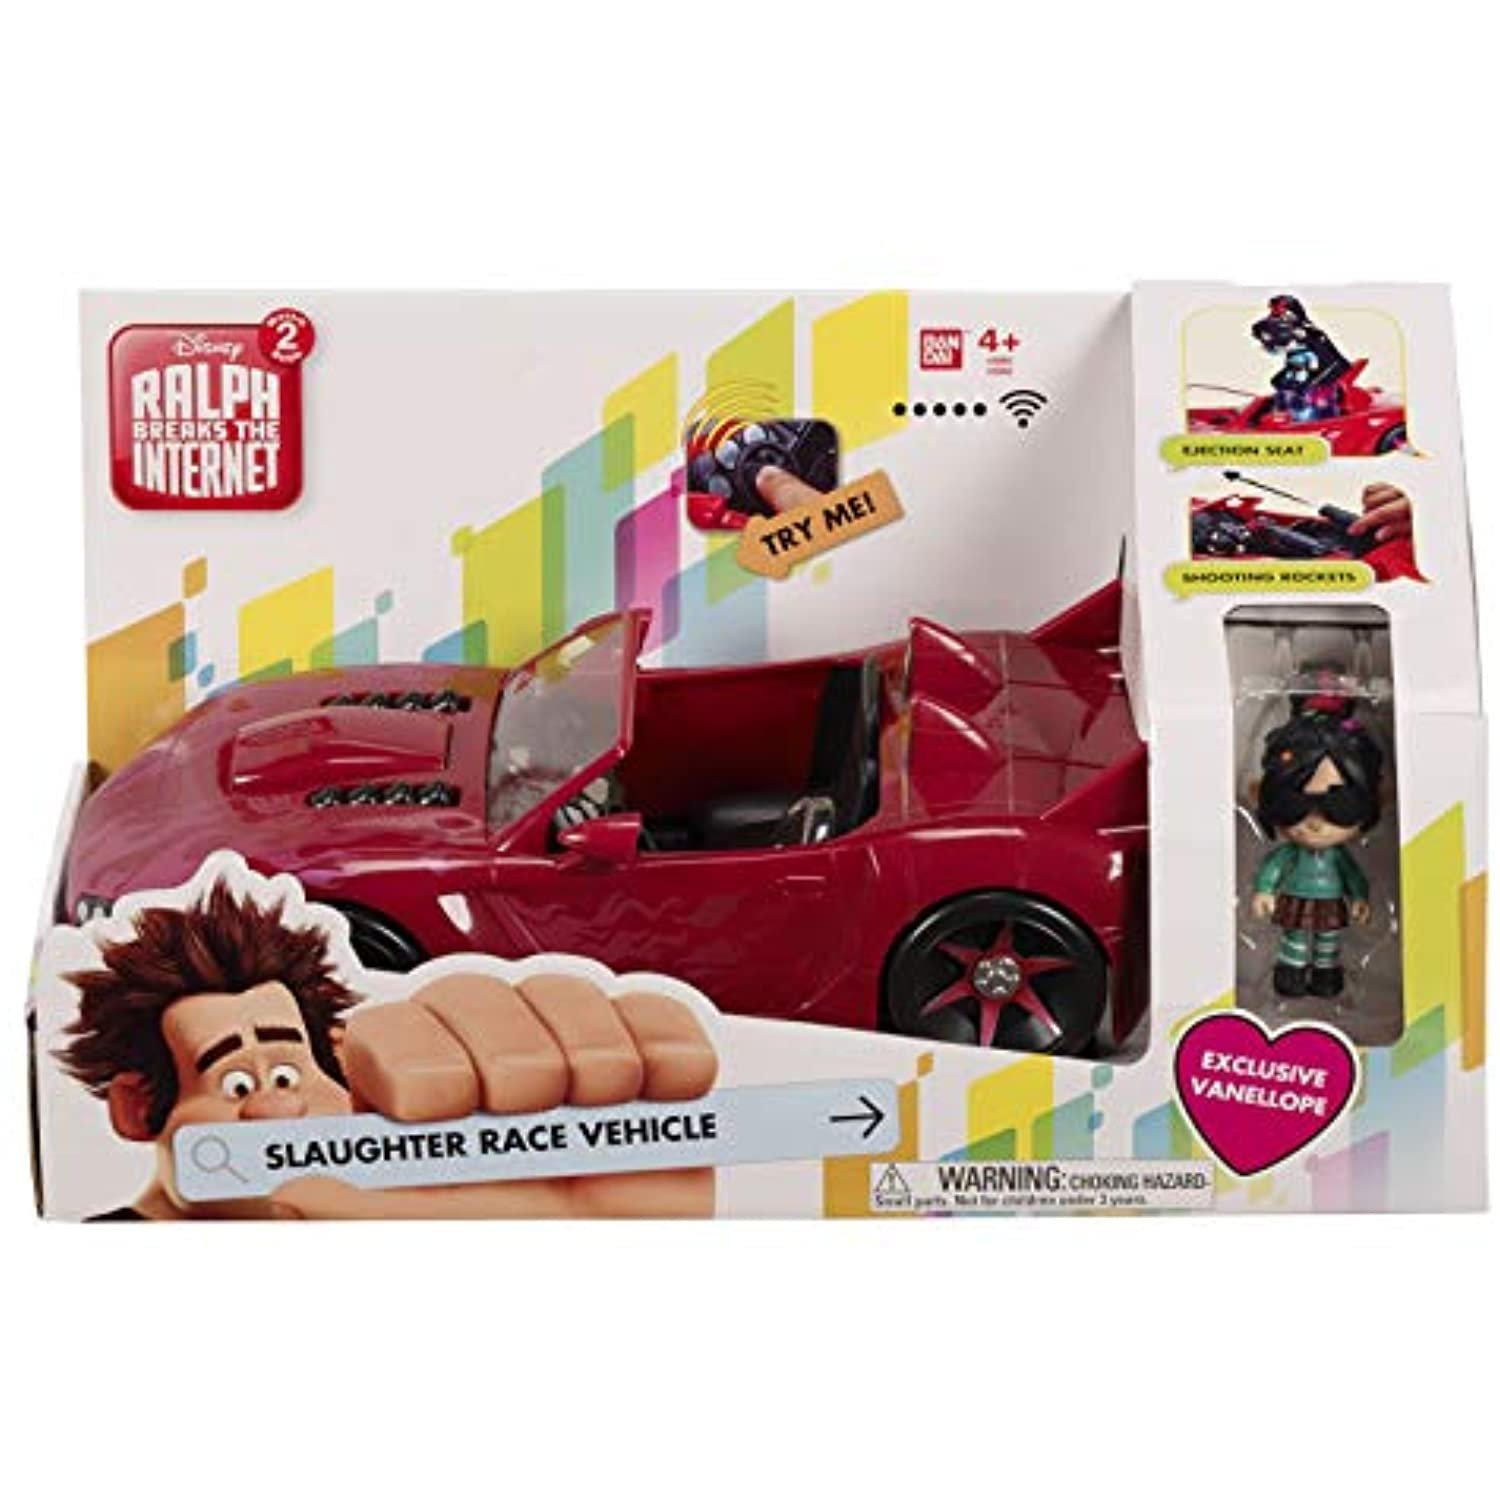 Toy Vehicle for Doll Barbie FXG57 Malibu House Playset and DVX59 Autre Glam Convertible Sports Pink Car